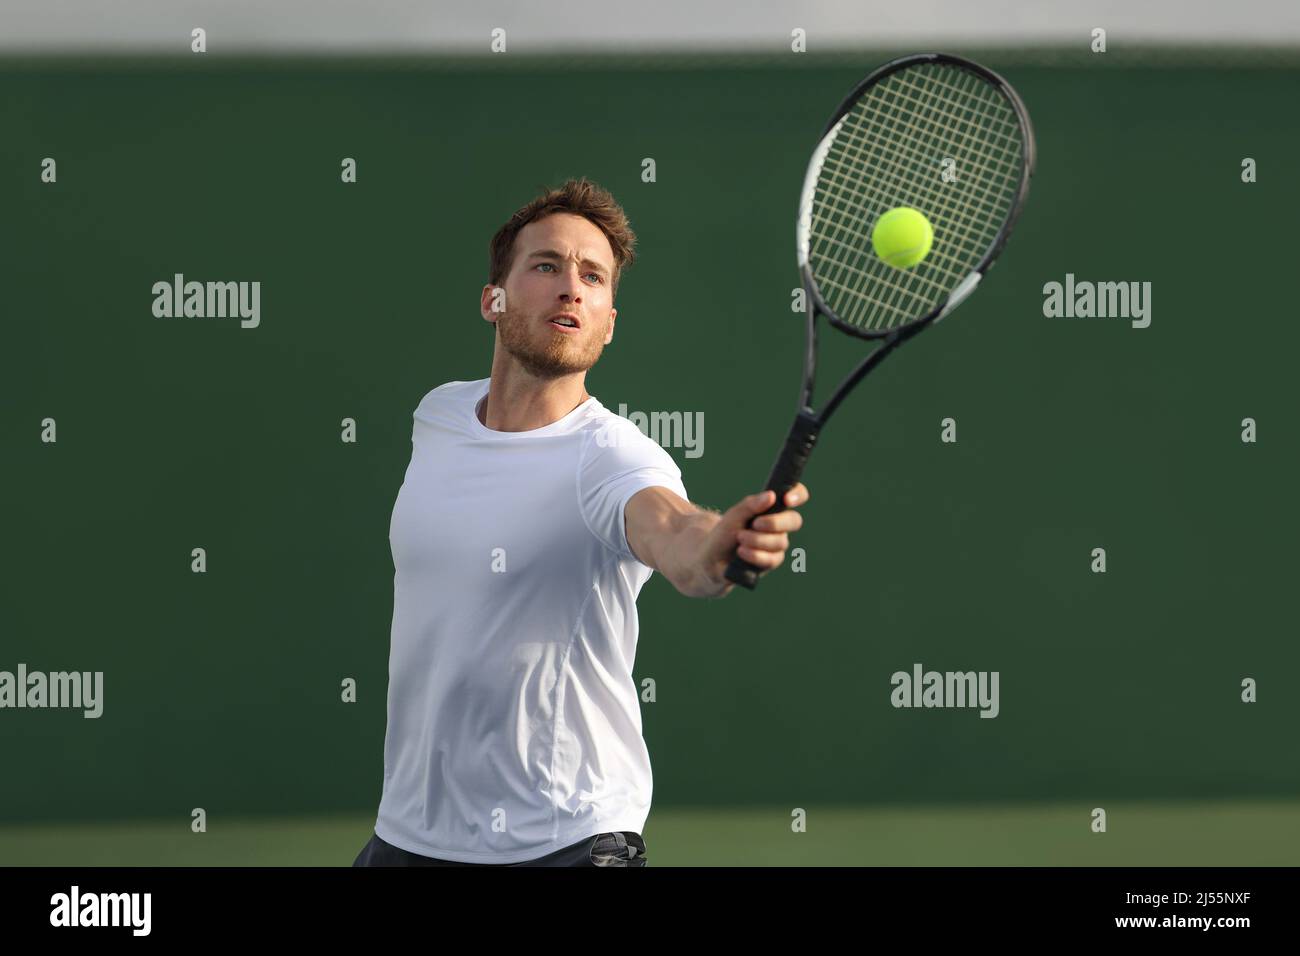 Tennis player man hitting ball playing tennis match on outdoor hard court in fitness club. Male sport athlete healthy lifestyle Stock Photo